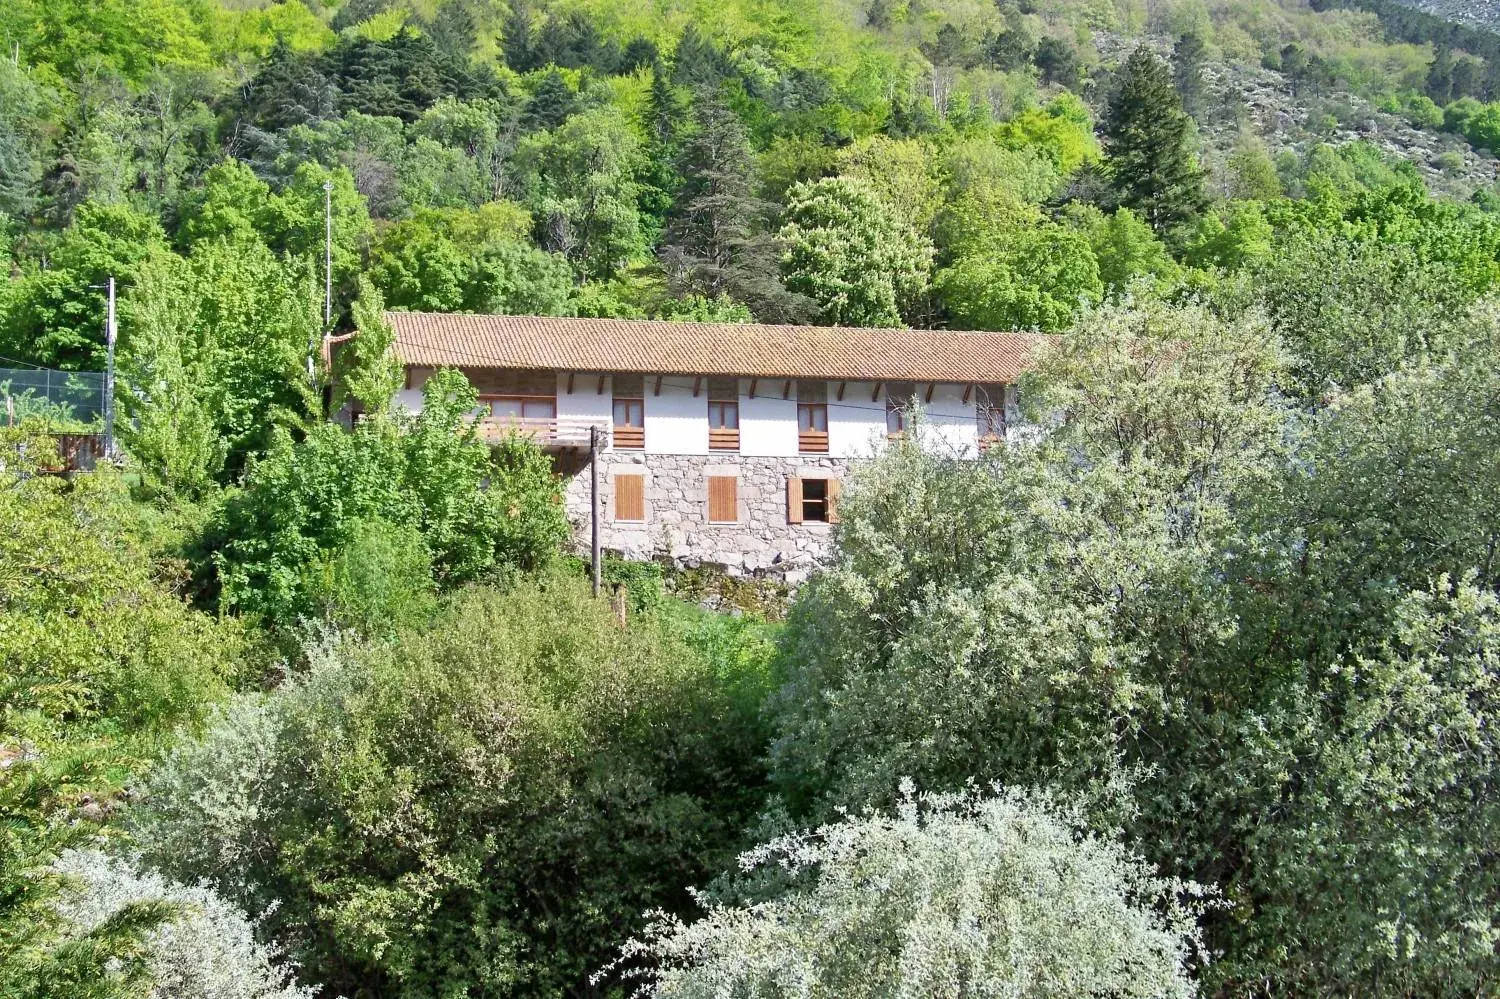 Property Building in Inatel Manteigas